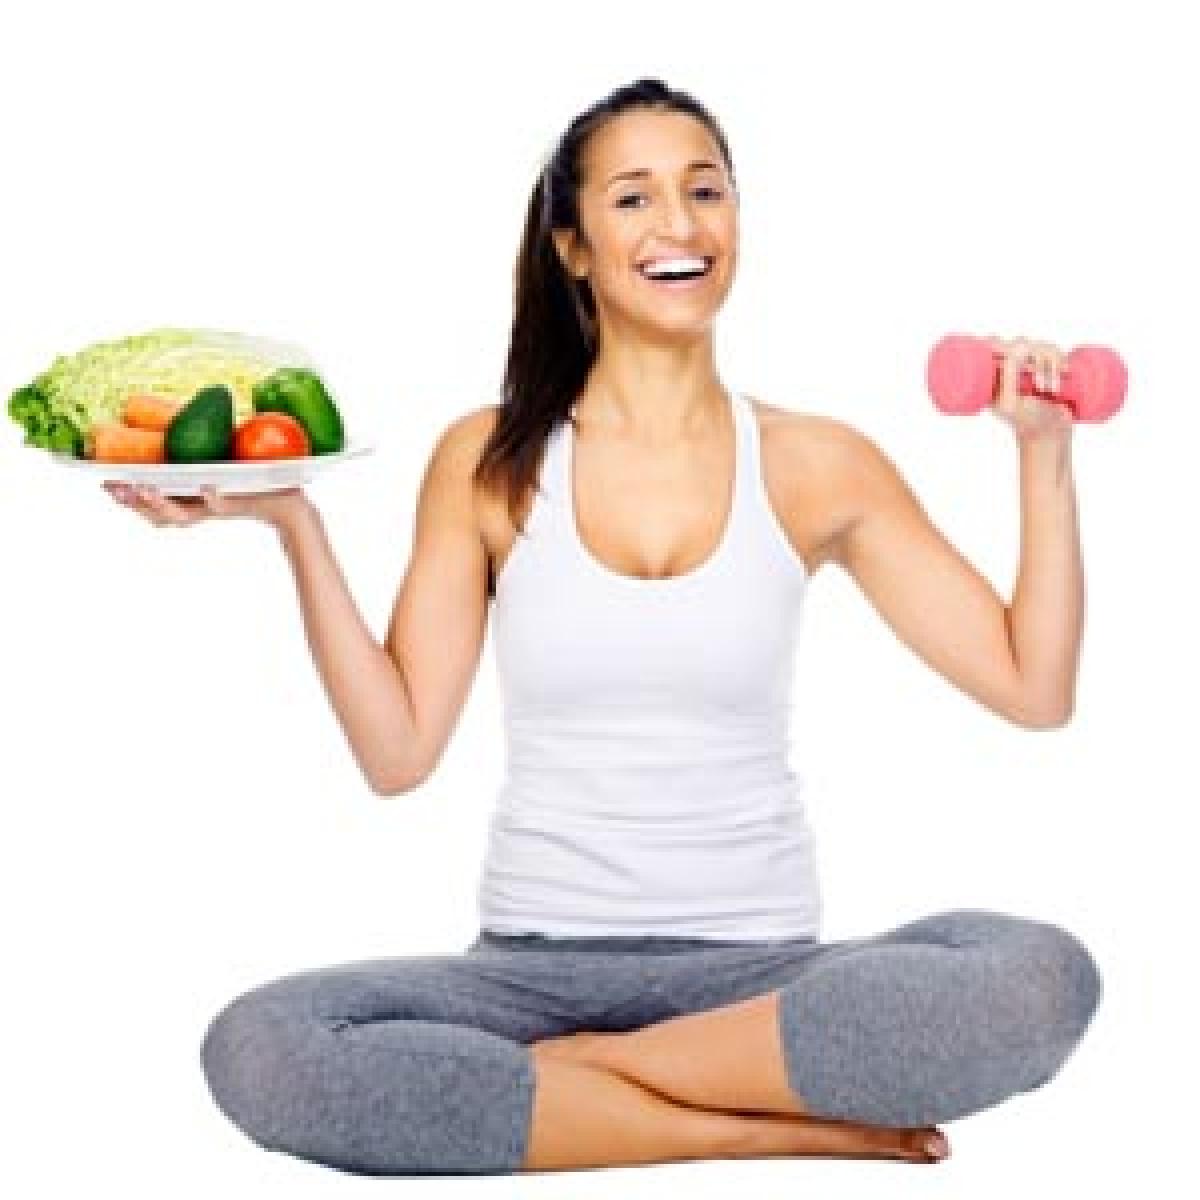 Balanced diet and exercise may prevent heart problems 